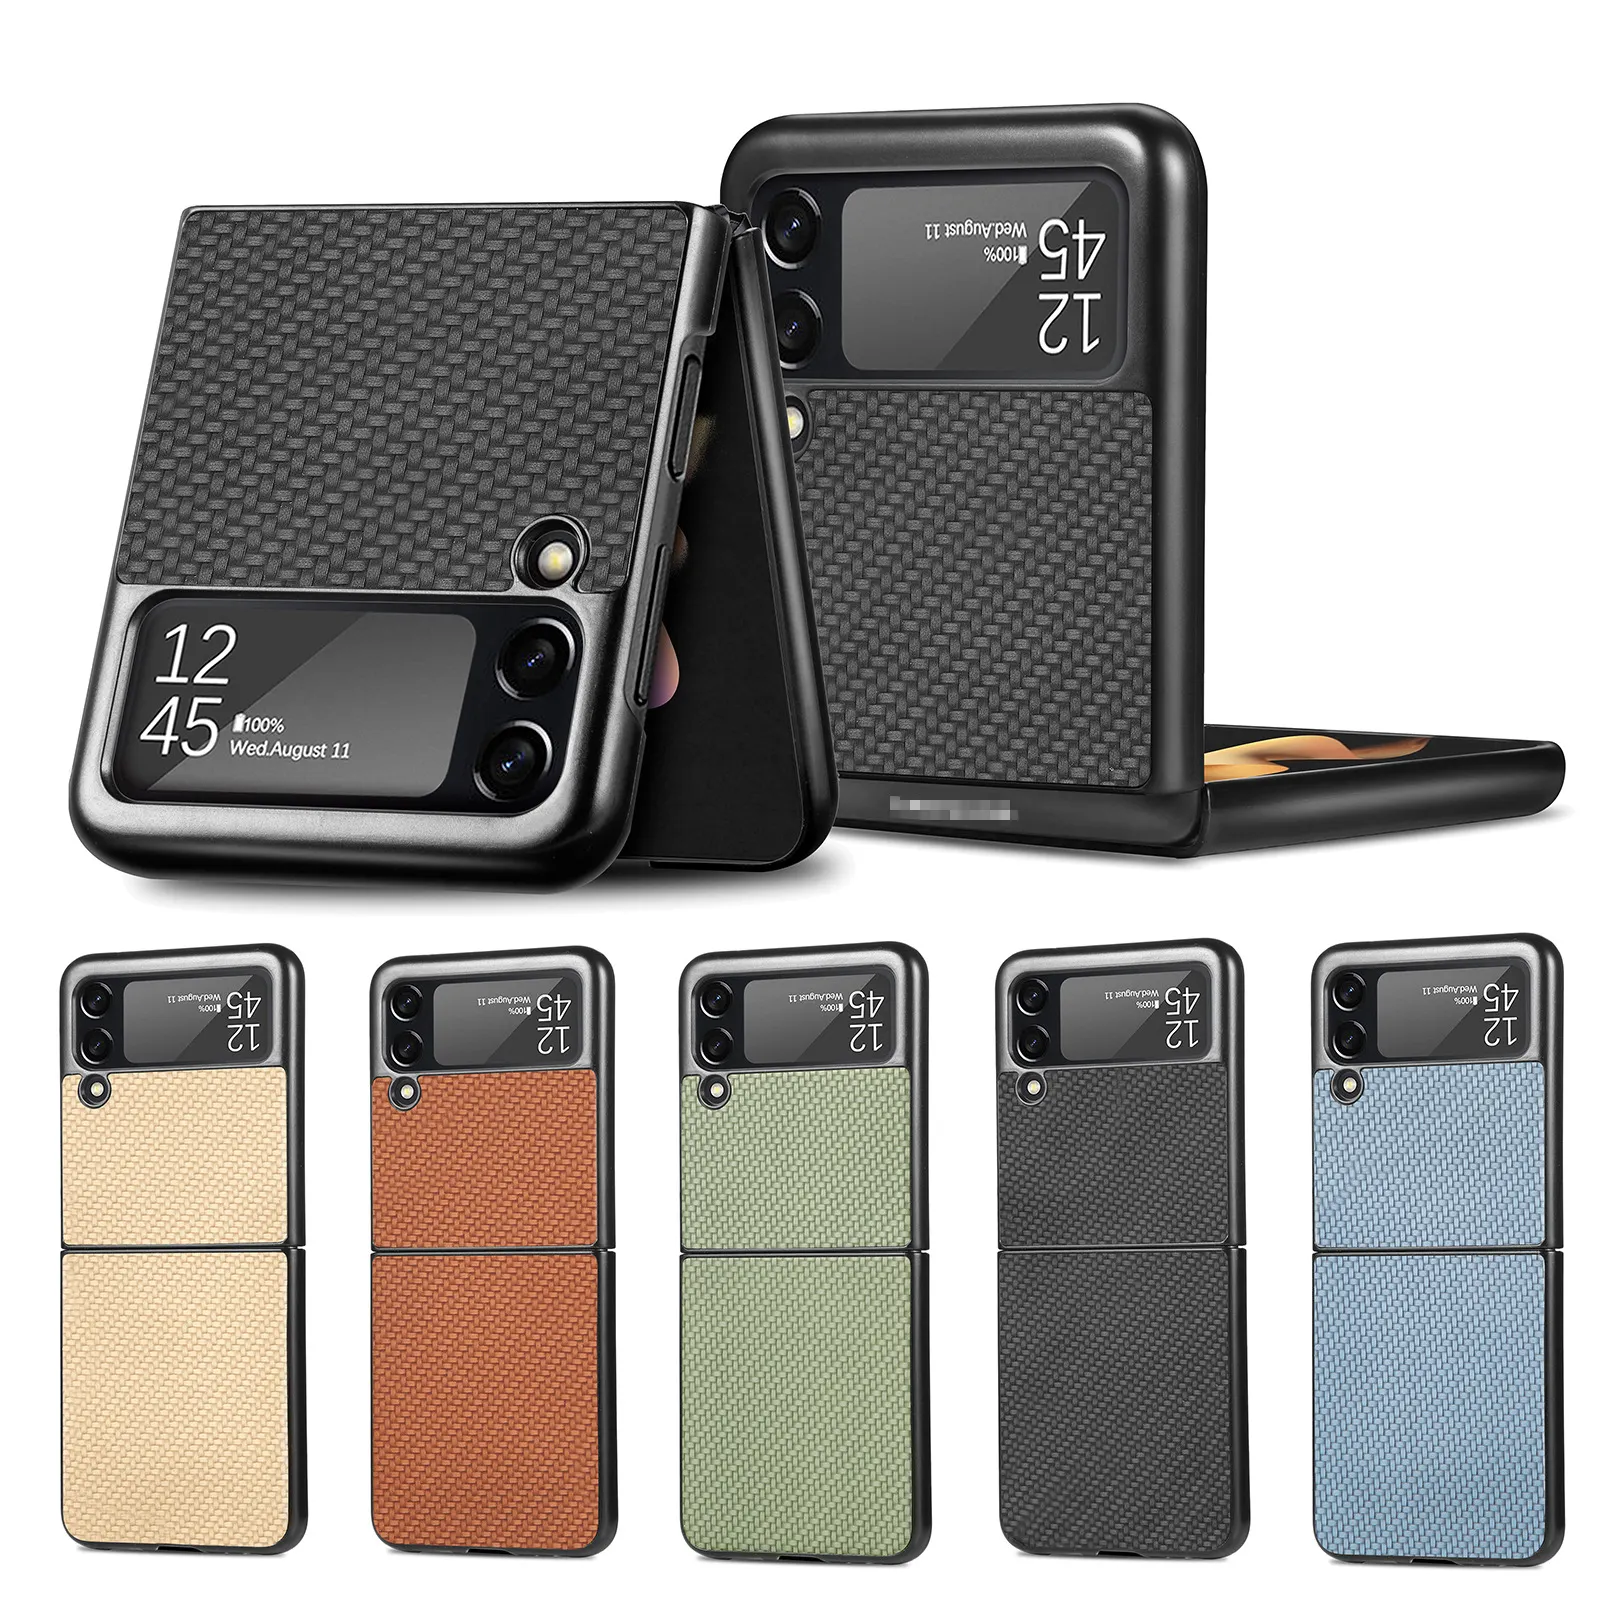 2022 HuaMJ Wholesale Fashion Colorful Drop-resistant Cover For PC Samsung Galaxy Z Flip 2 3 4 Case